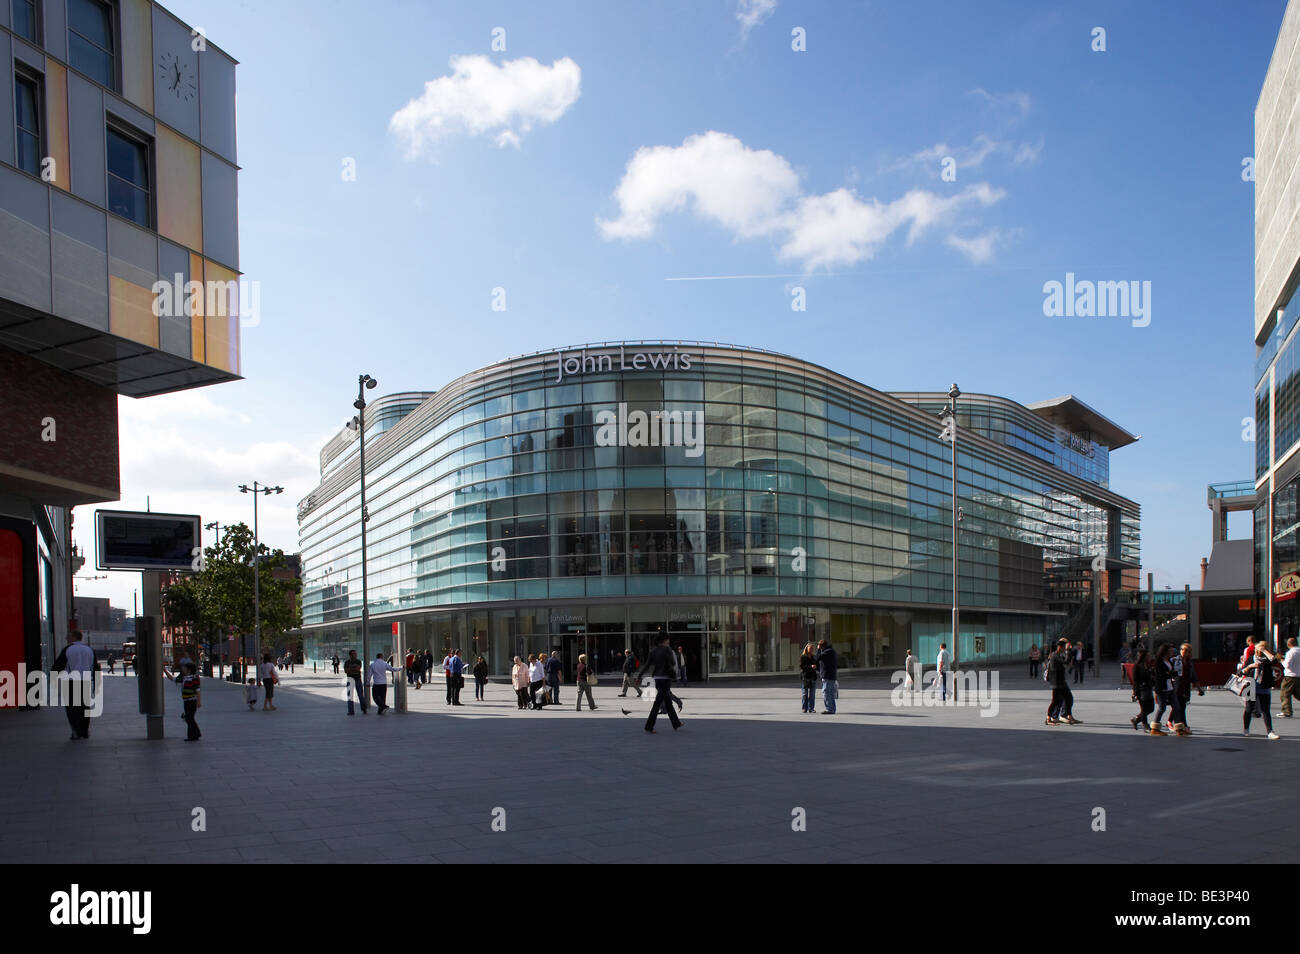 John Lewis Liverpool High Resolution Stock Photography and Images - Alamy